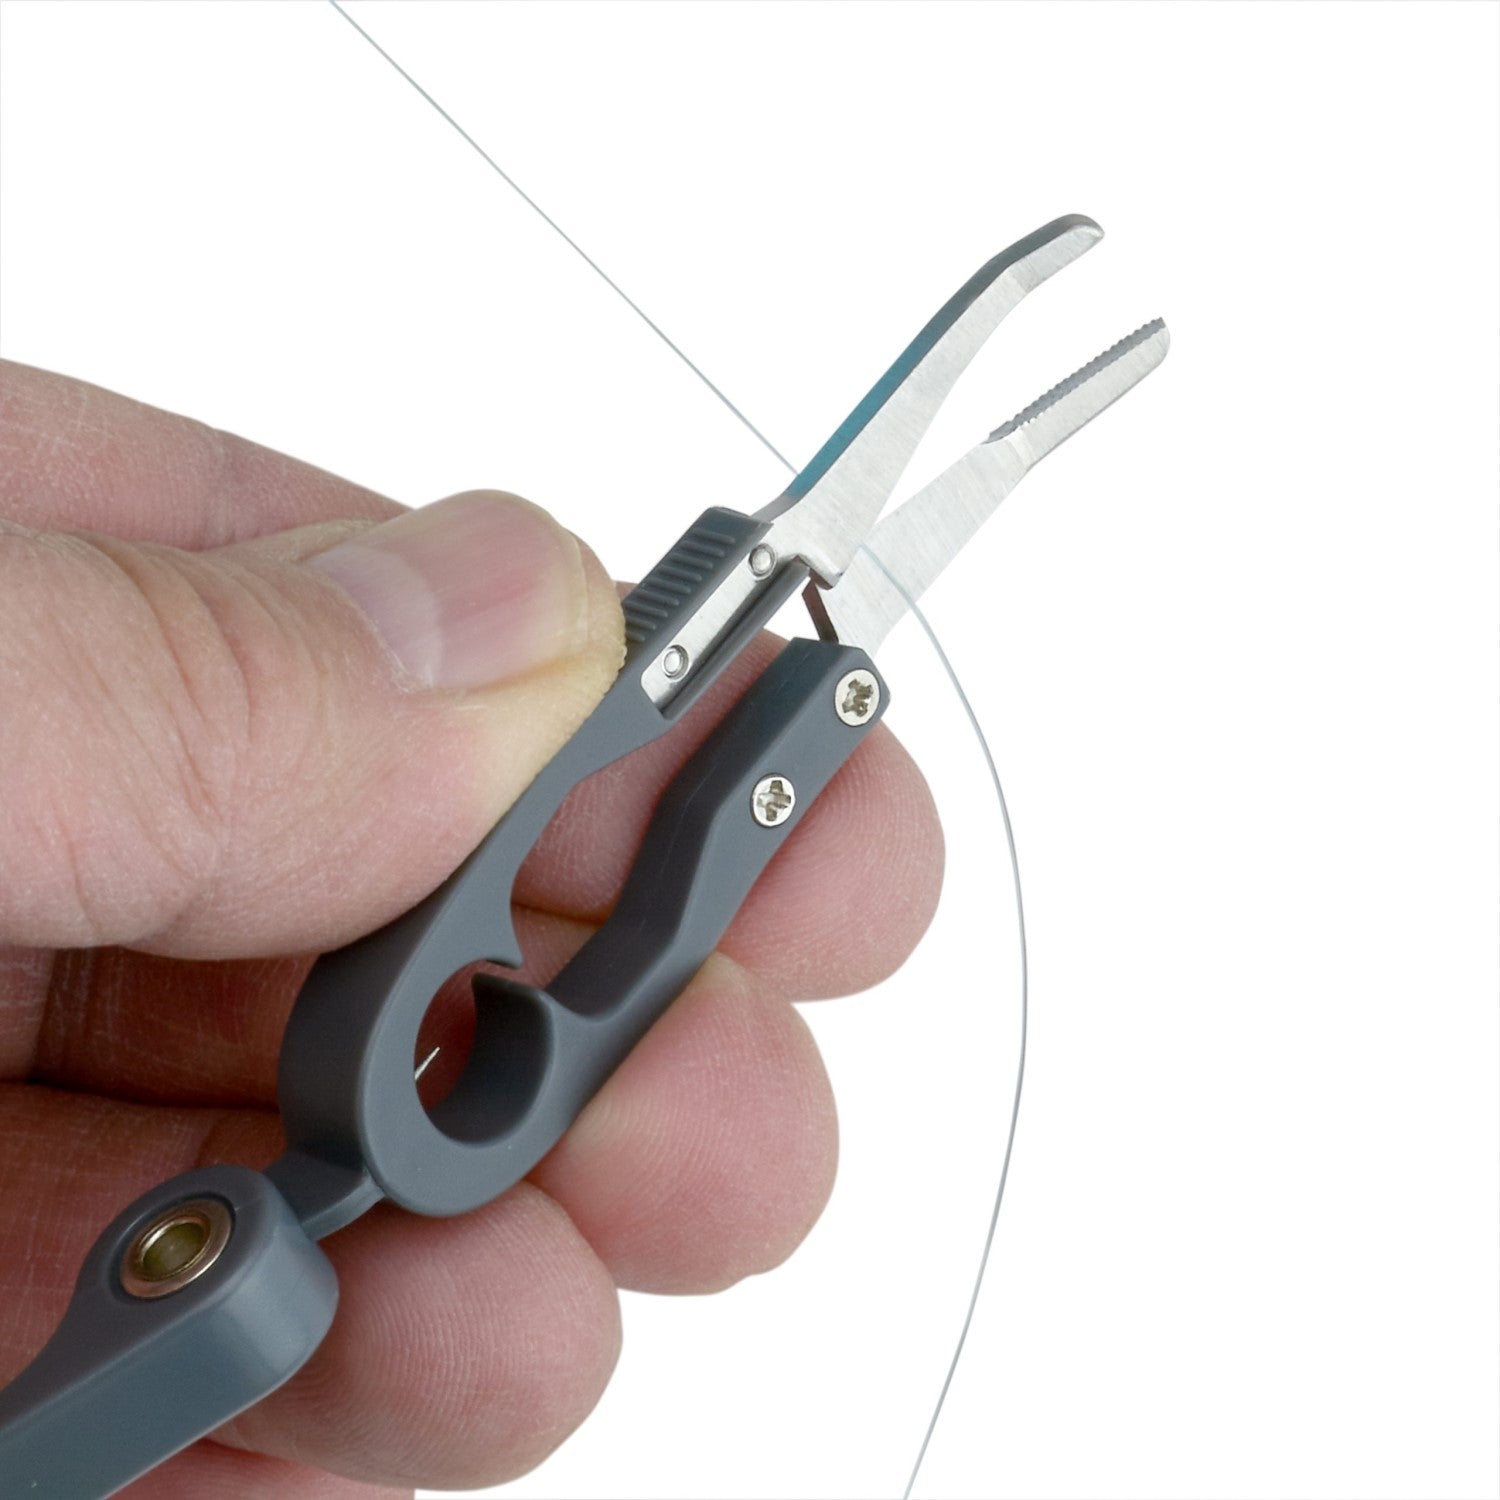 Image of the line cutter on the Fish'n Grip.